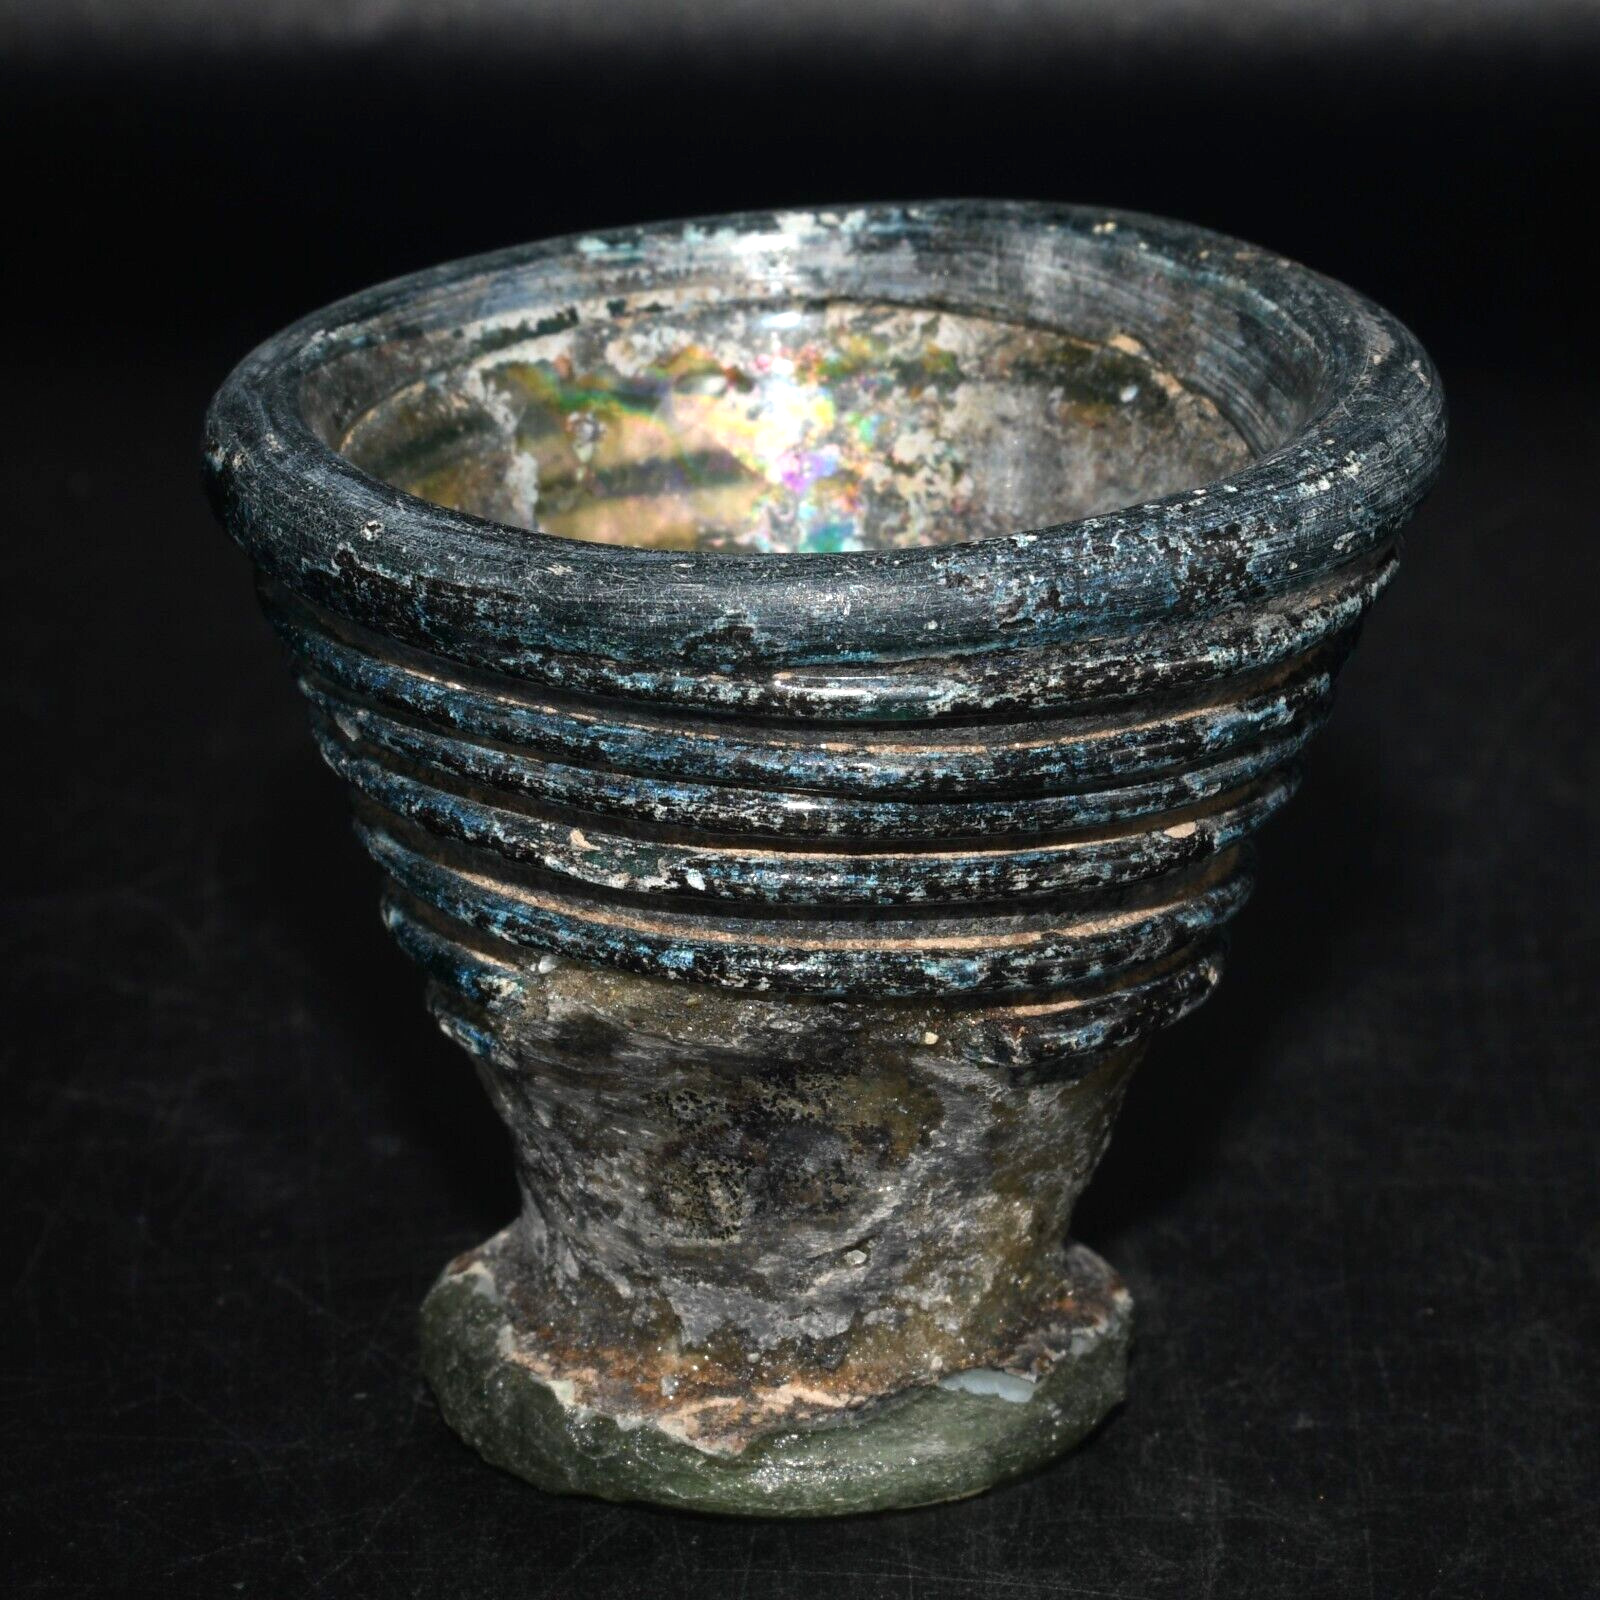 Genuine Iridescent Roman Glass Cup with Trailed Decoration C. 1st-3rd Century AD